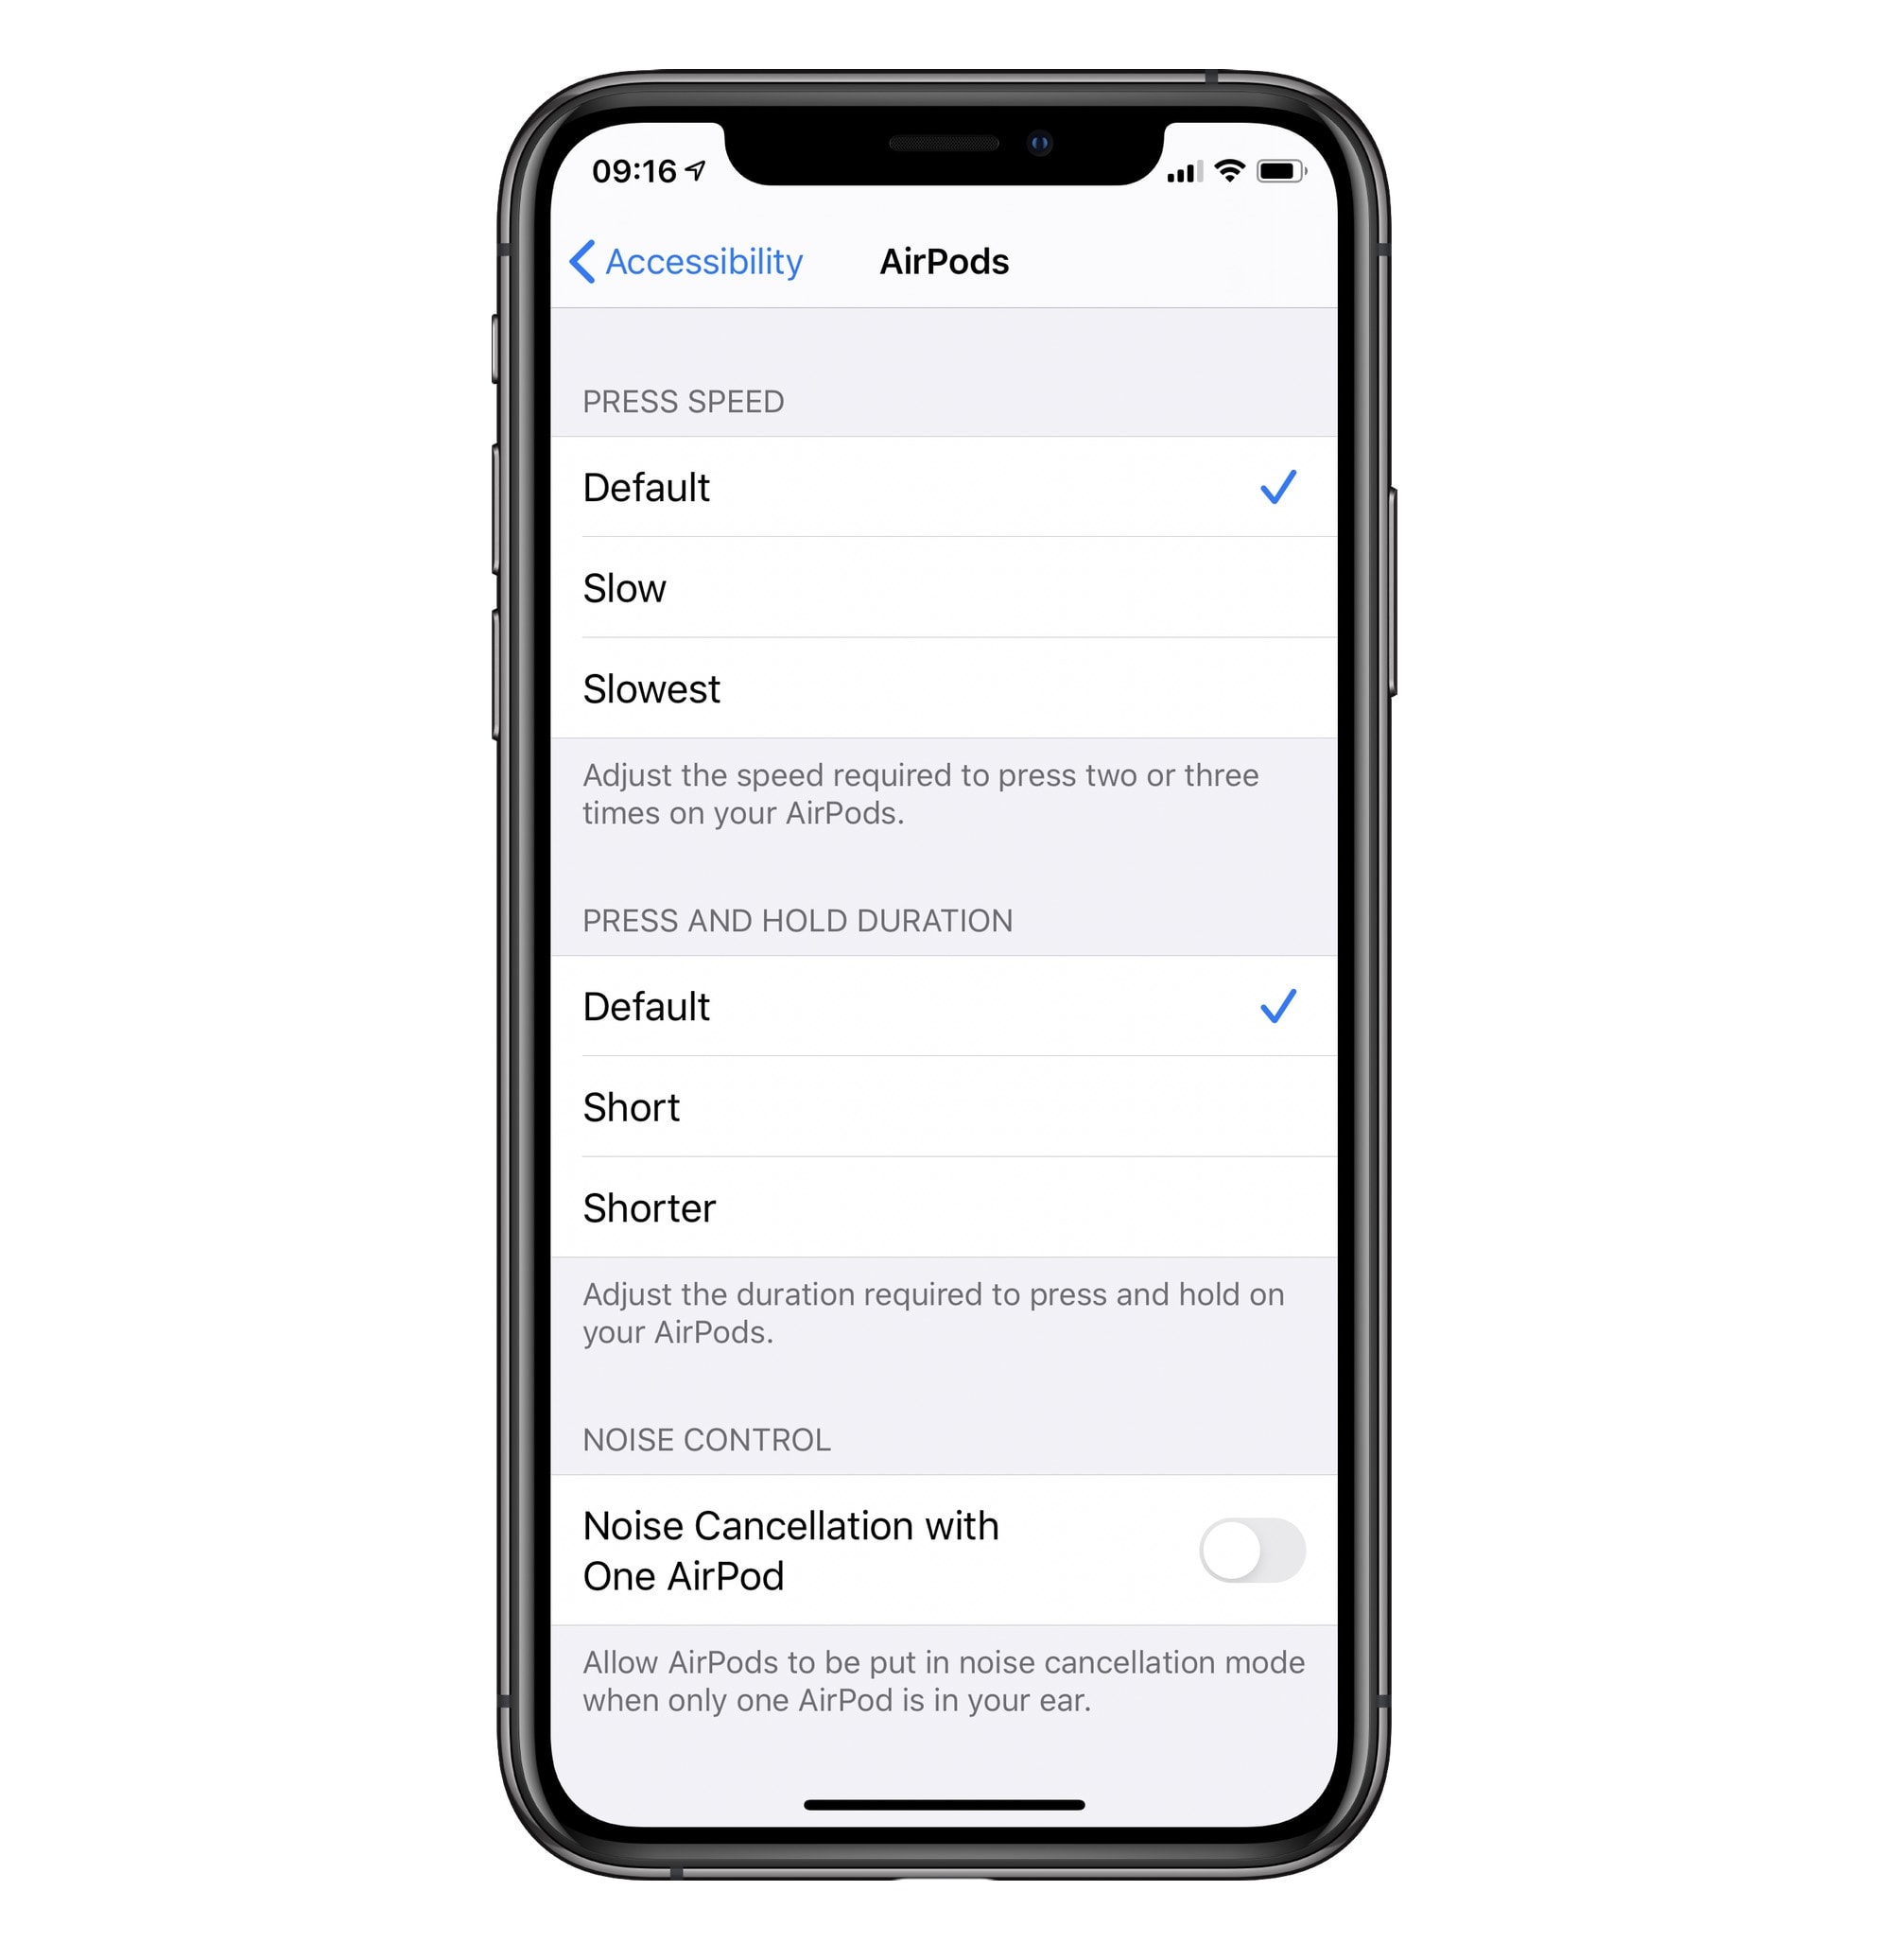 fungere pistol skræmmende Check out these hidden AirPods Pro settings on your iPhone | Cult of Mac